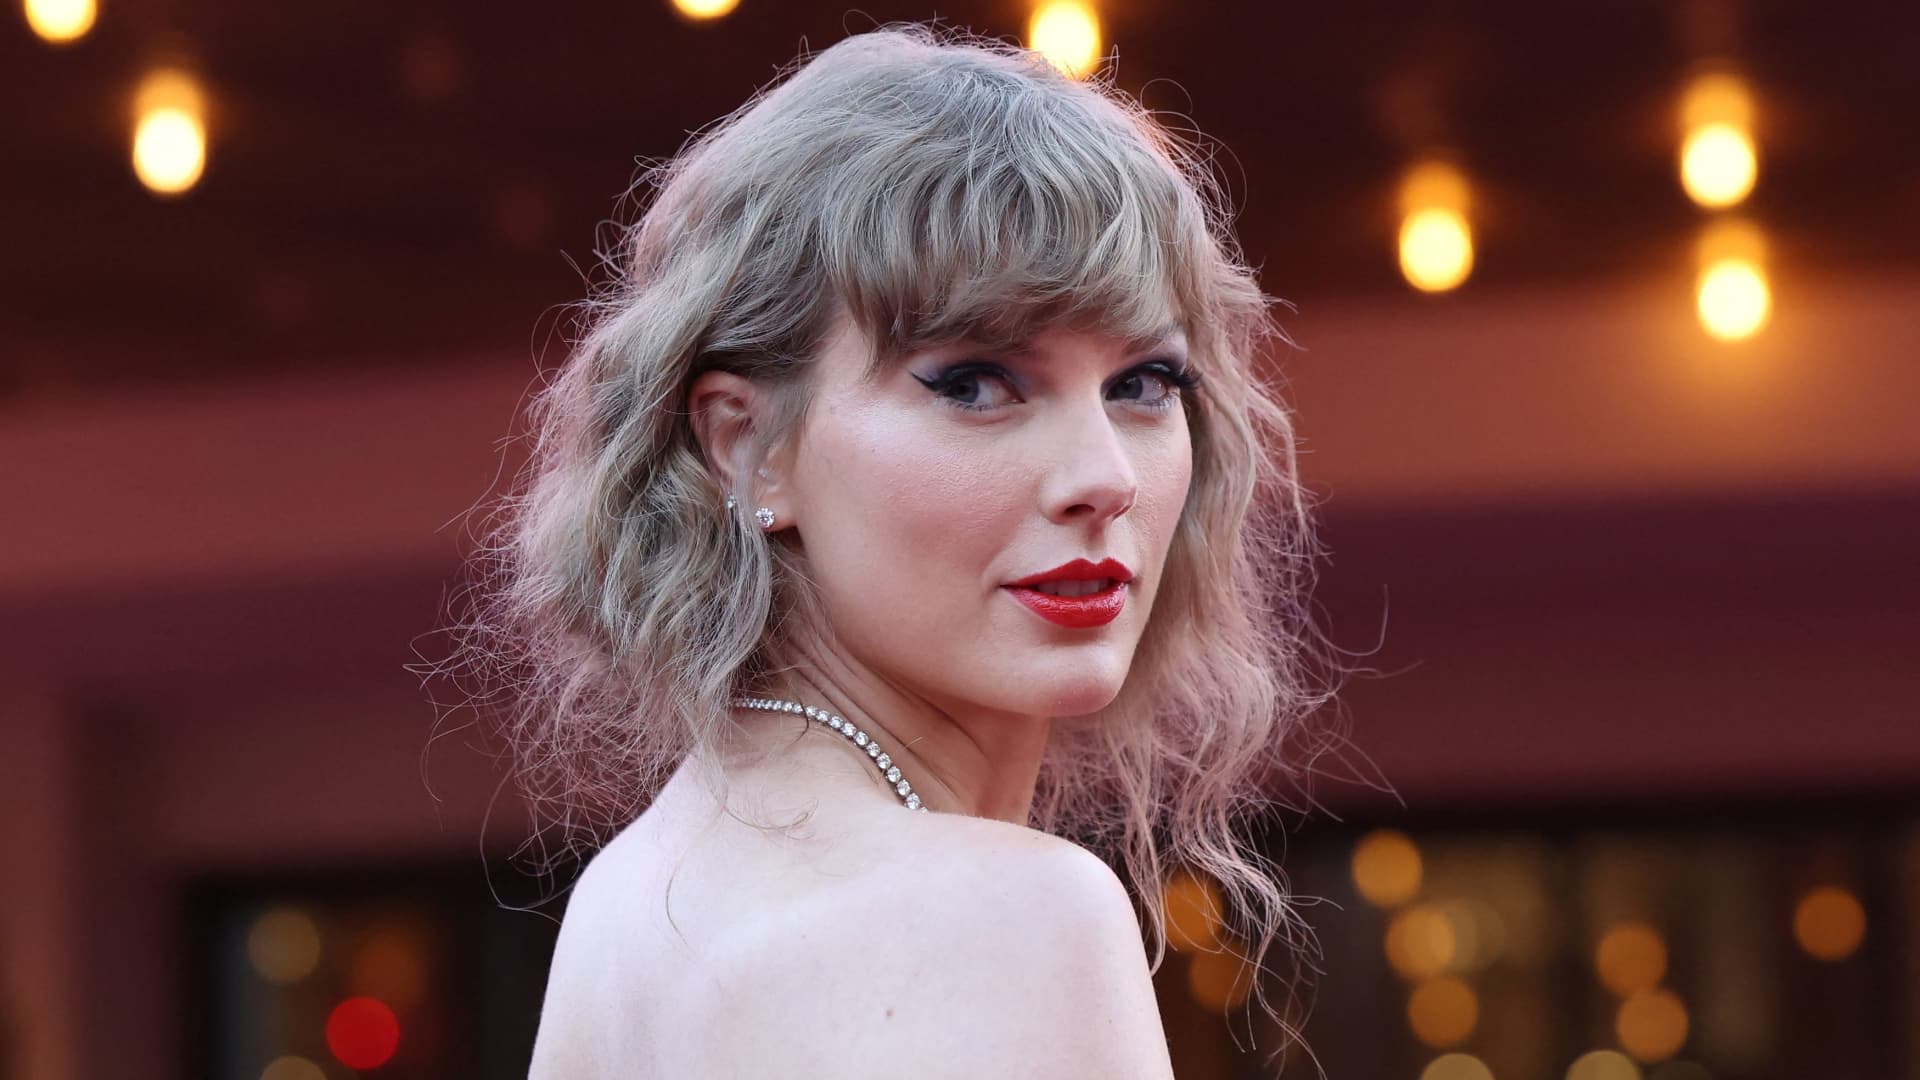 Universal Music Group, Taylor Swift's label, to pull music from TikTok